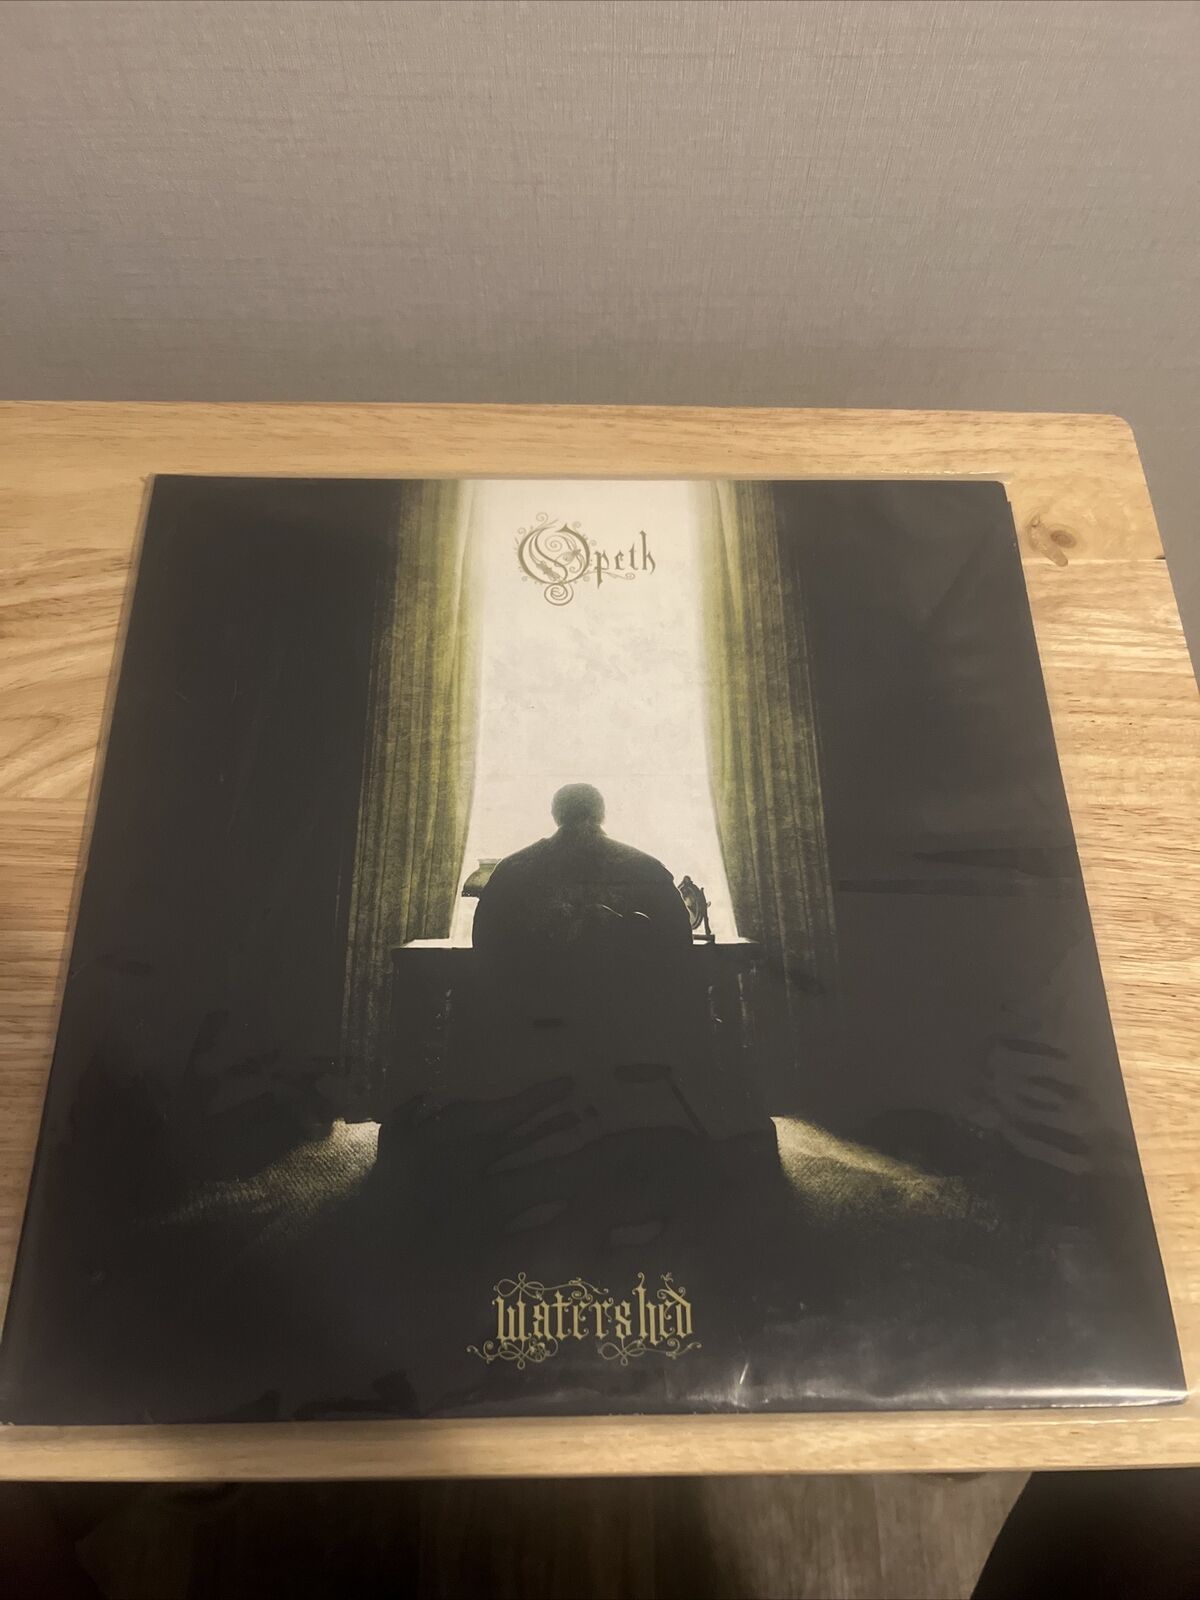 Watershed by Opeth (CD, Jun-2008, Roadrunner Records)